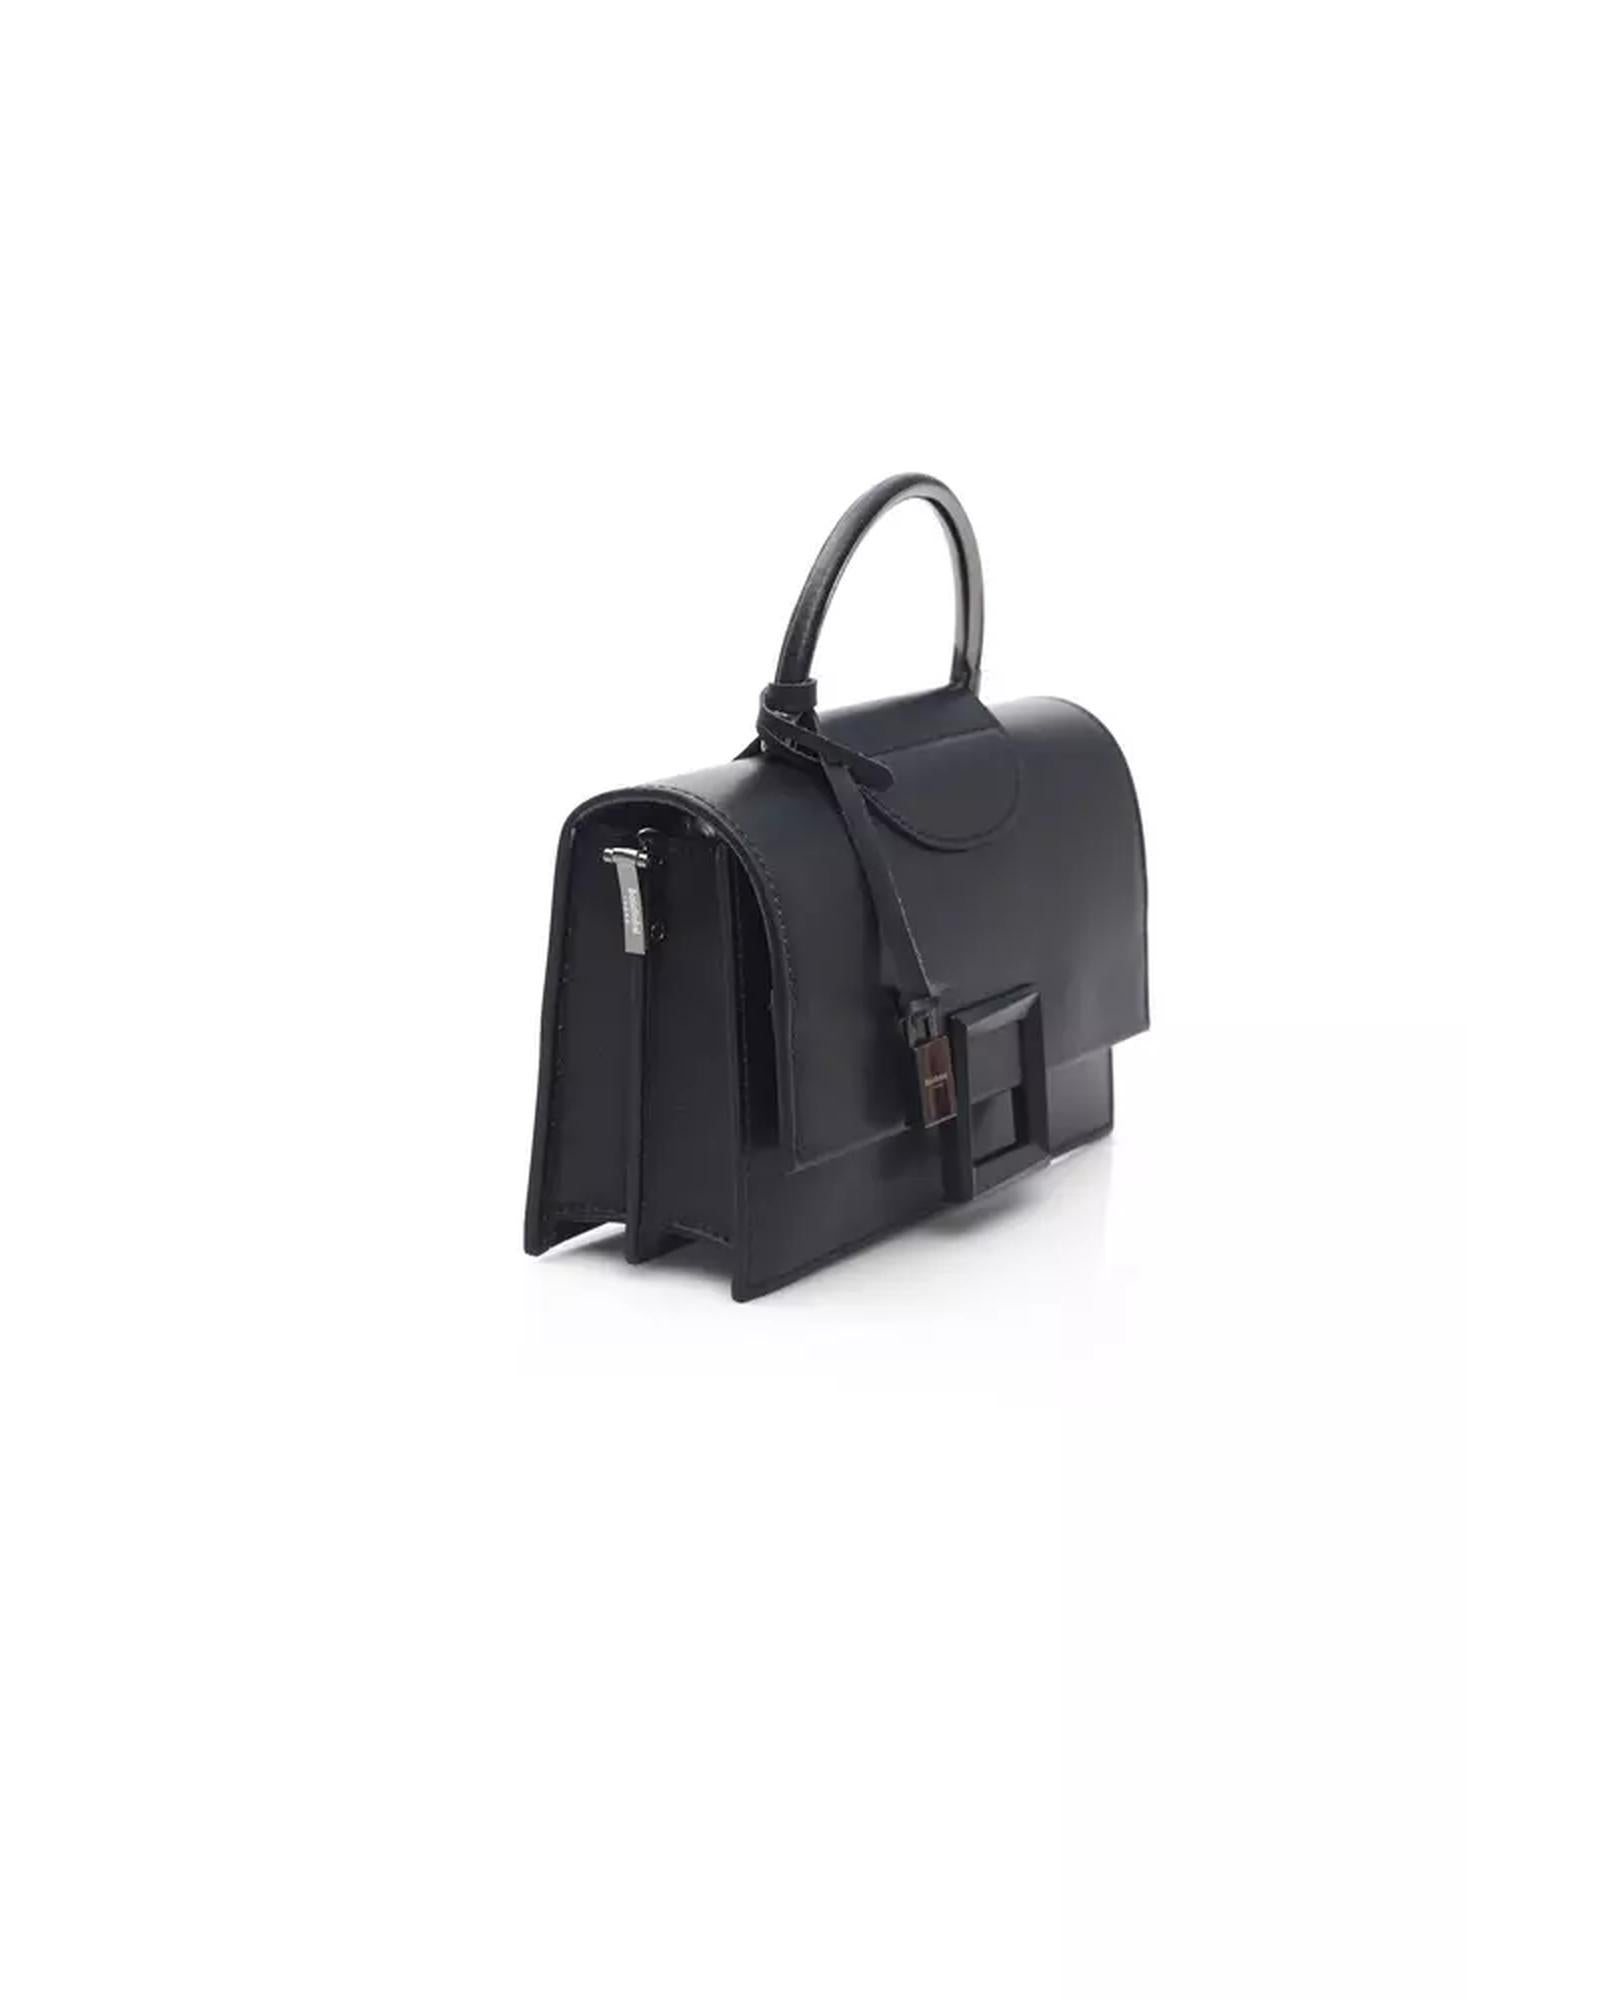 Black Leather Shoulder Bag with Flap Closure One Size Women